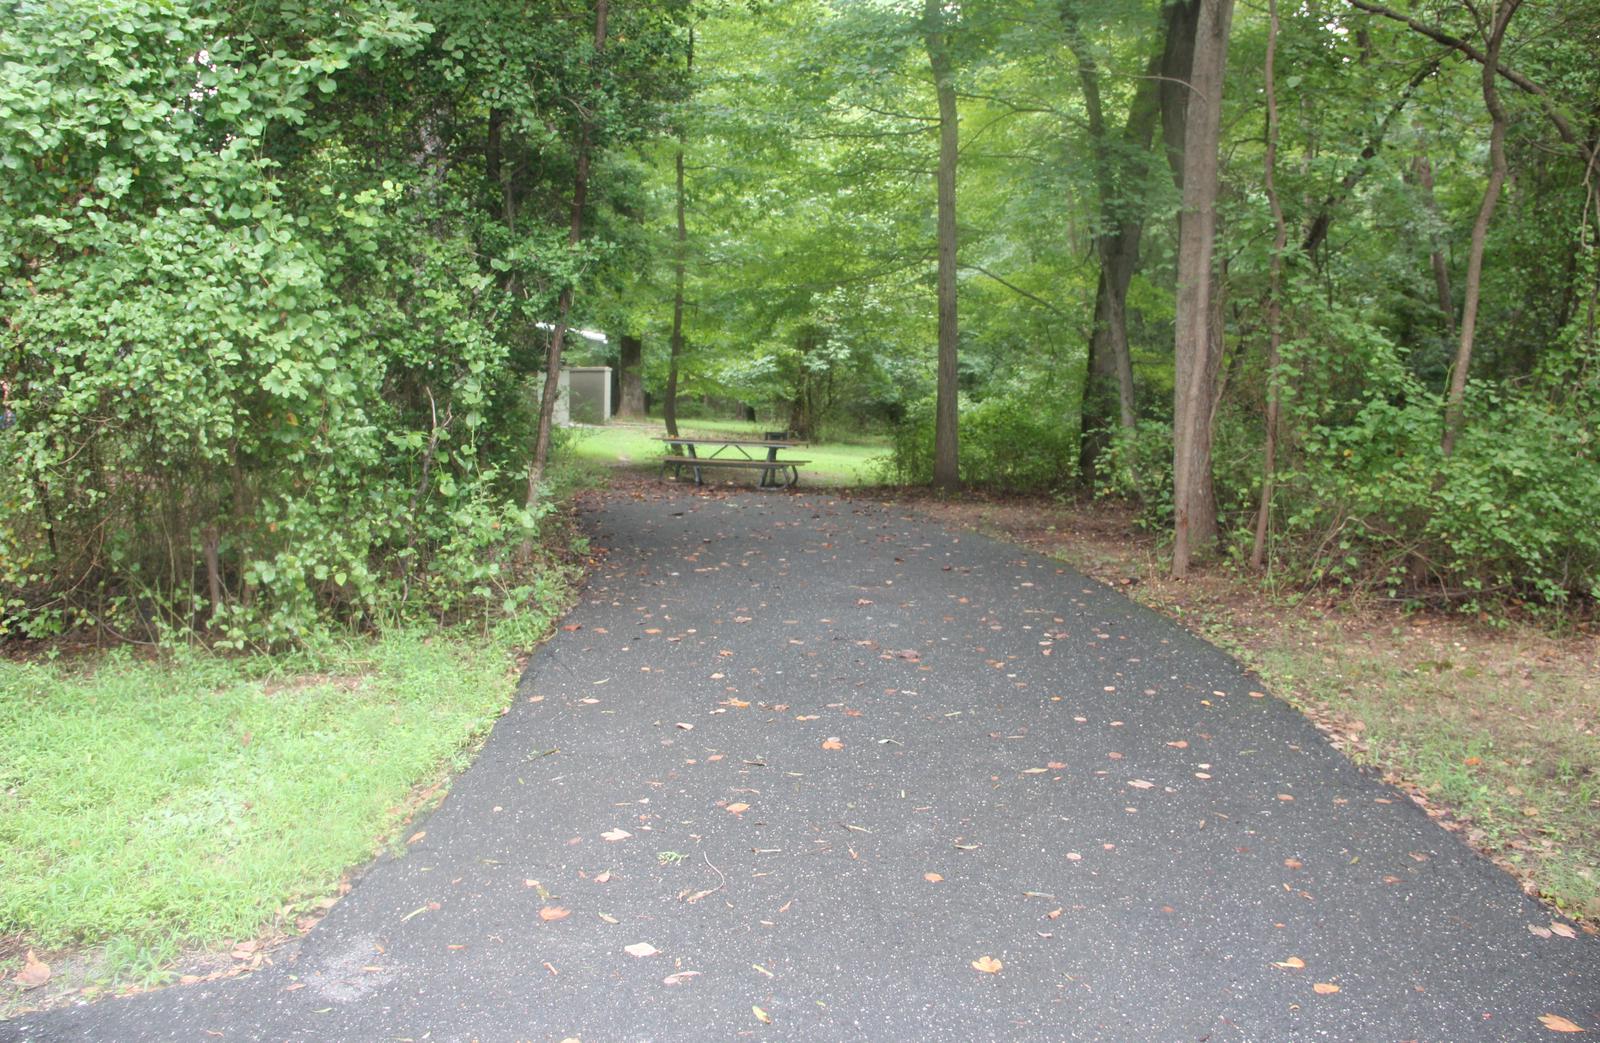 D 129 D Loop of the Greenbelt Park Maryland campground